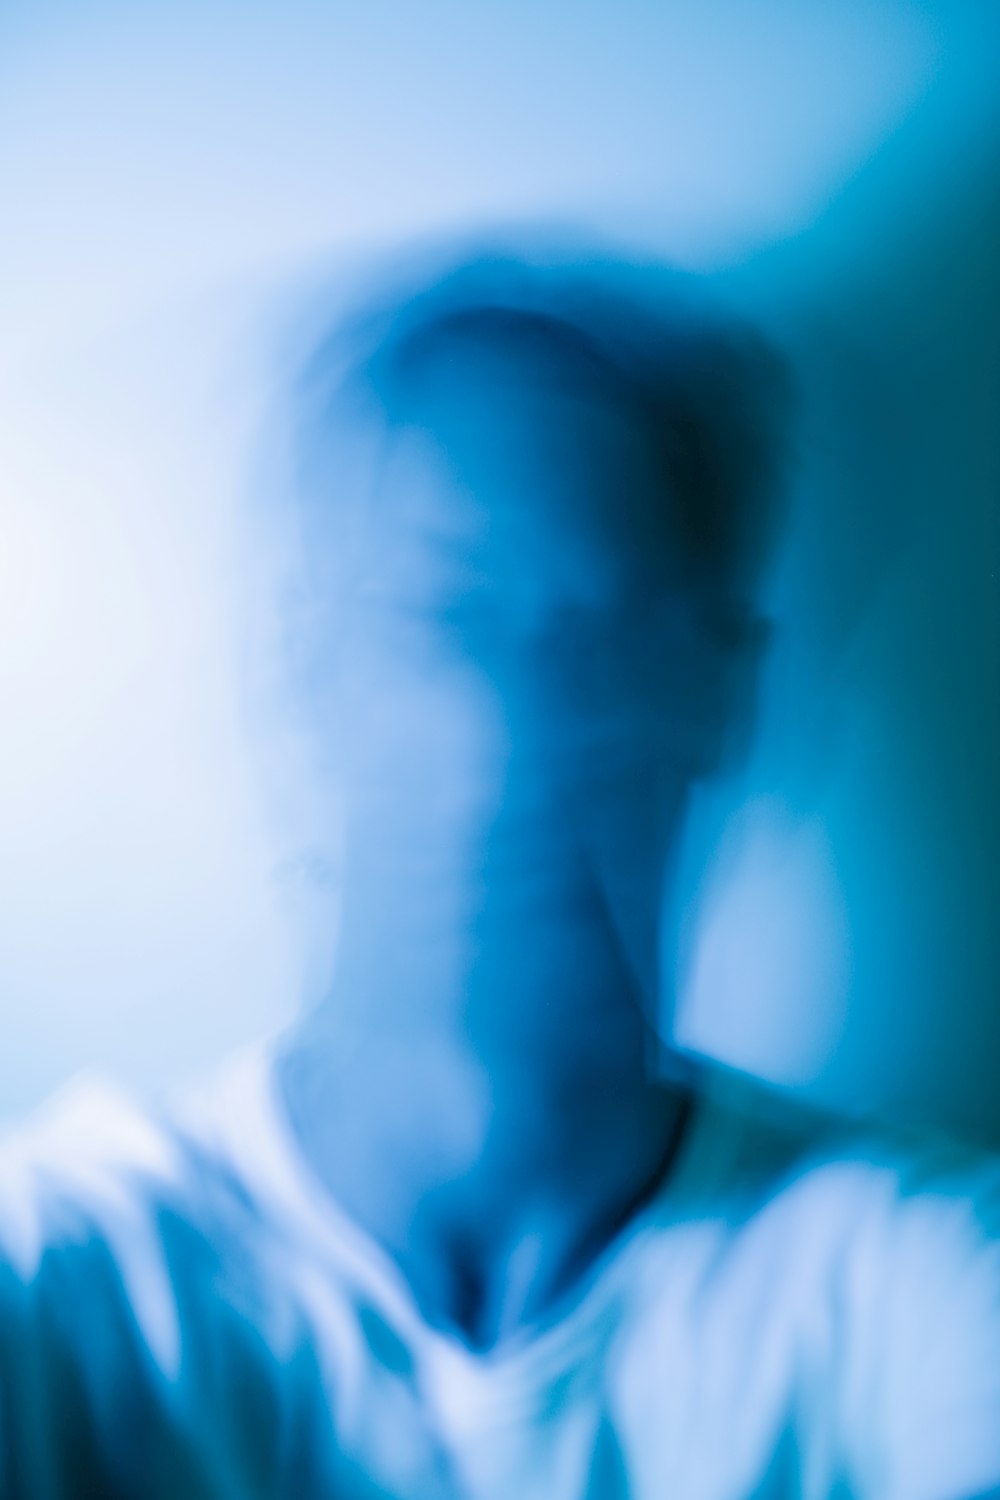 a blurry image of a person